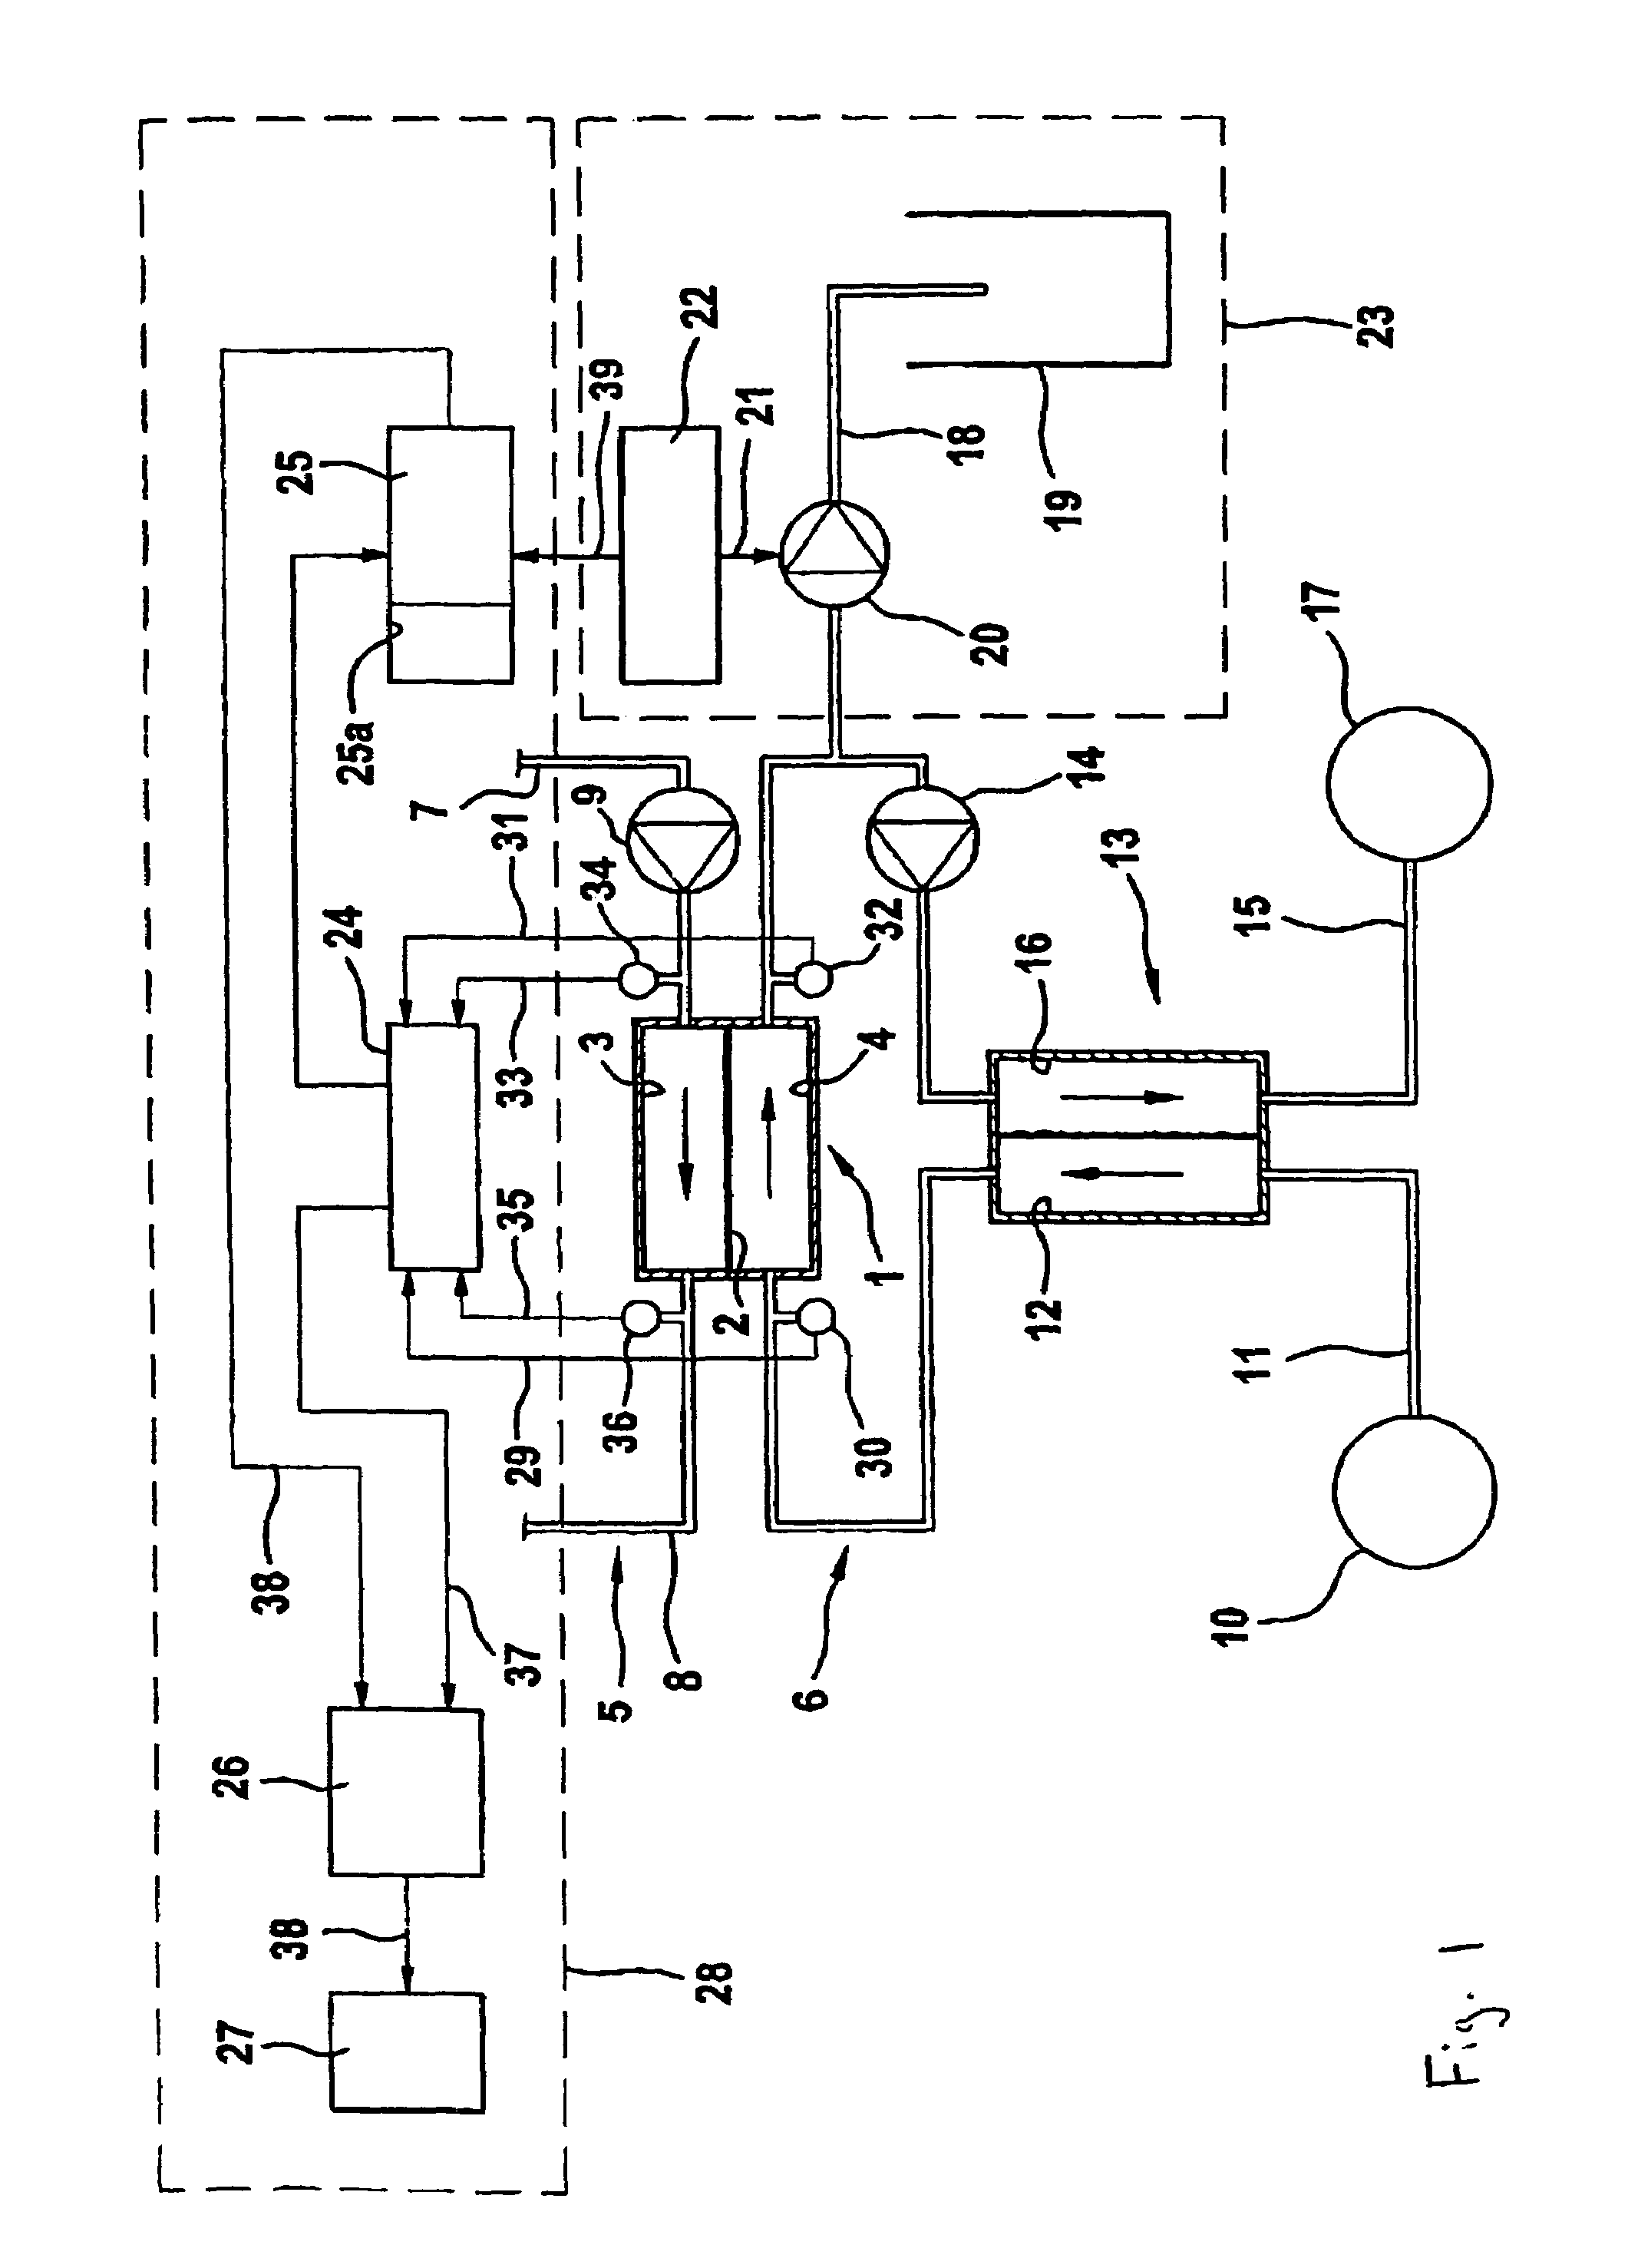 Safety device for a blood treatment machine and a method of increasing the safety of a blood treatment machine